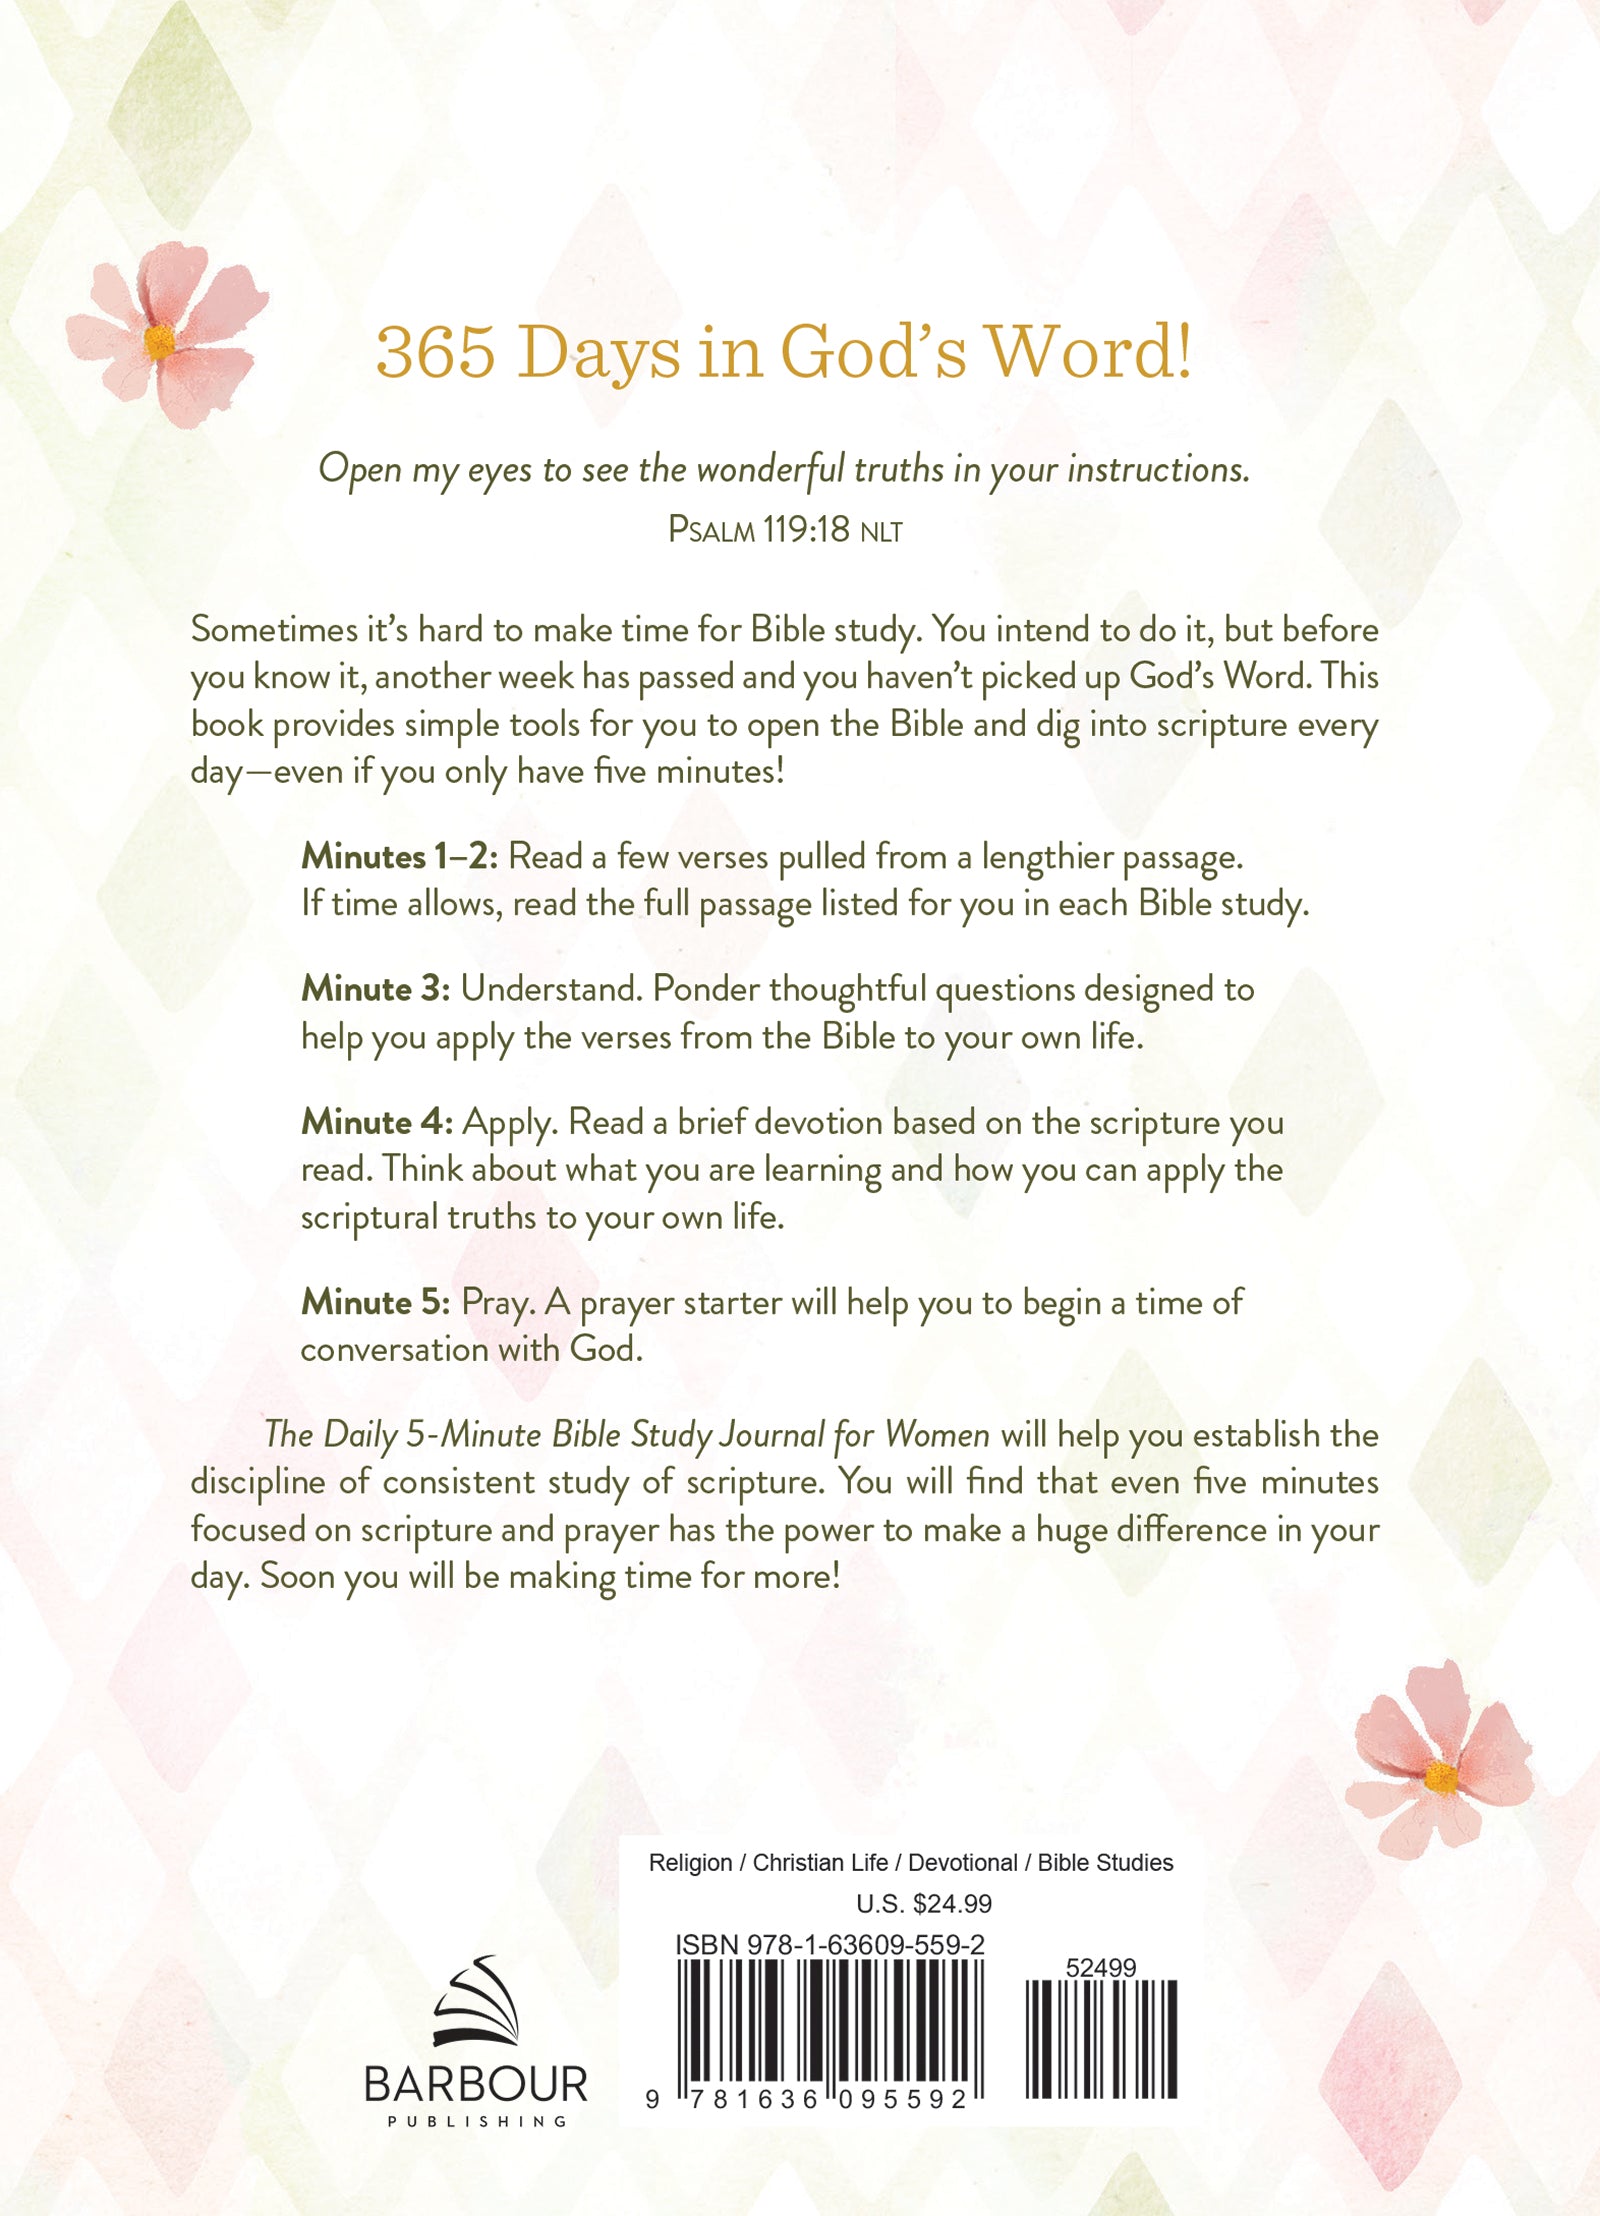 The Daily 5-Minute Bible Study Journal for Women - The Christian Gift Company